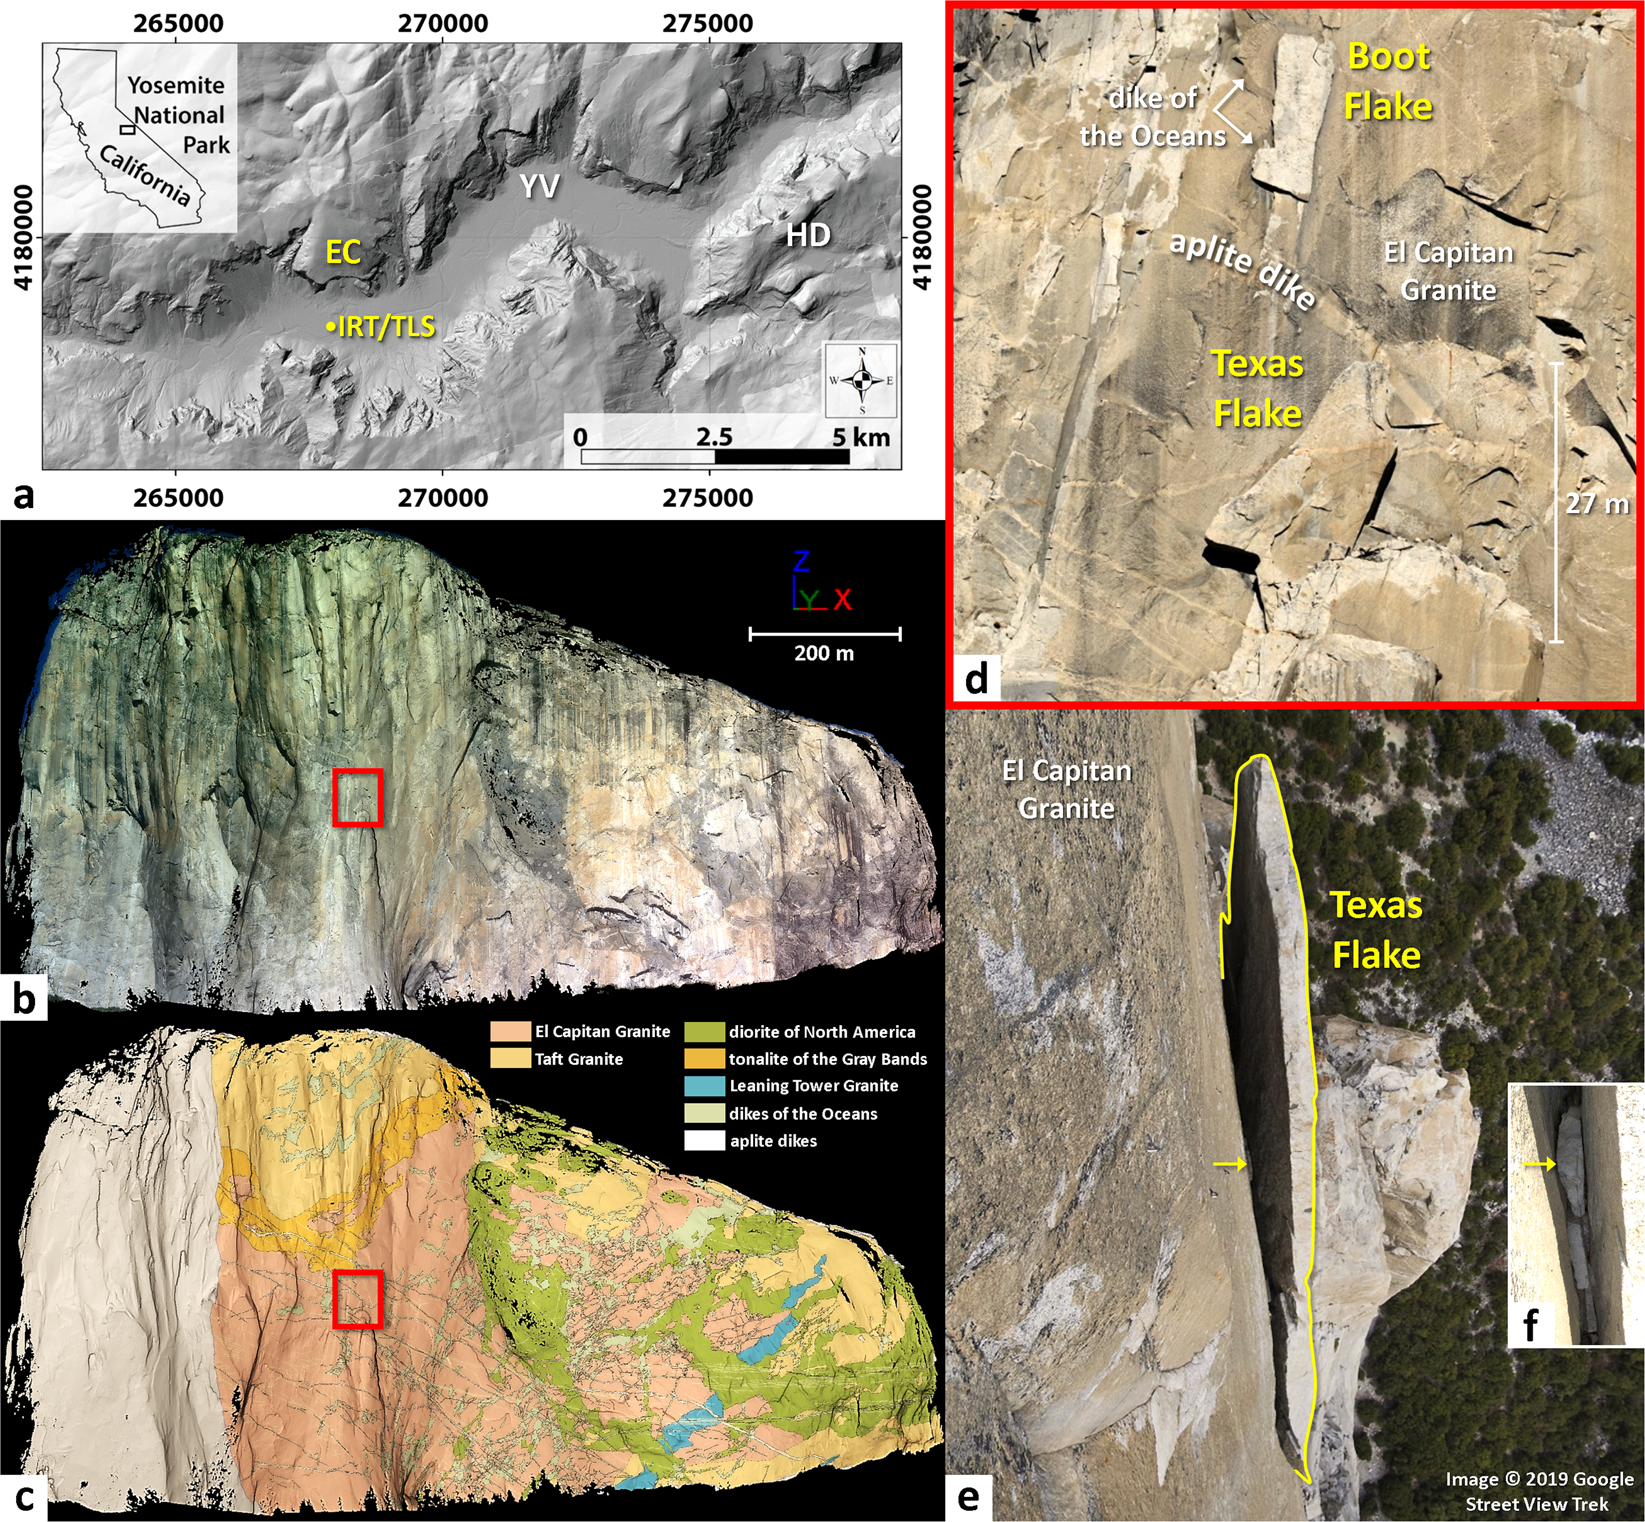 Detection of rock bridges by infrared thermal imaging and modeling